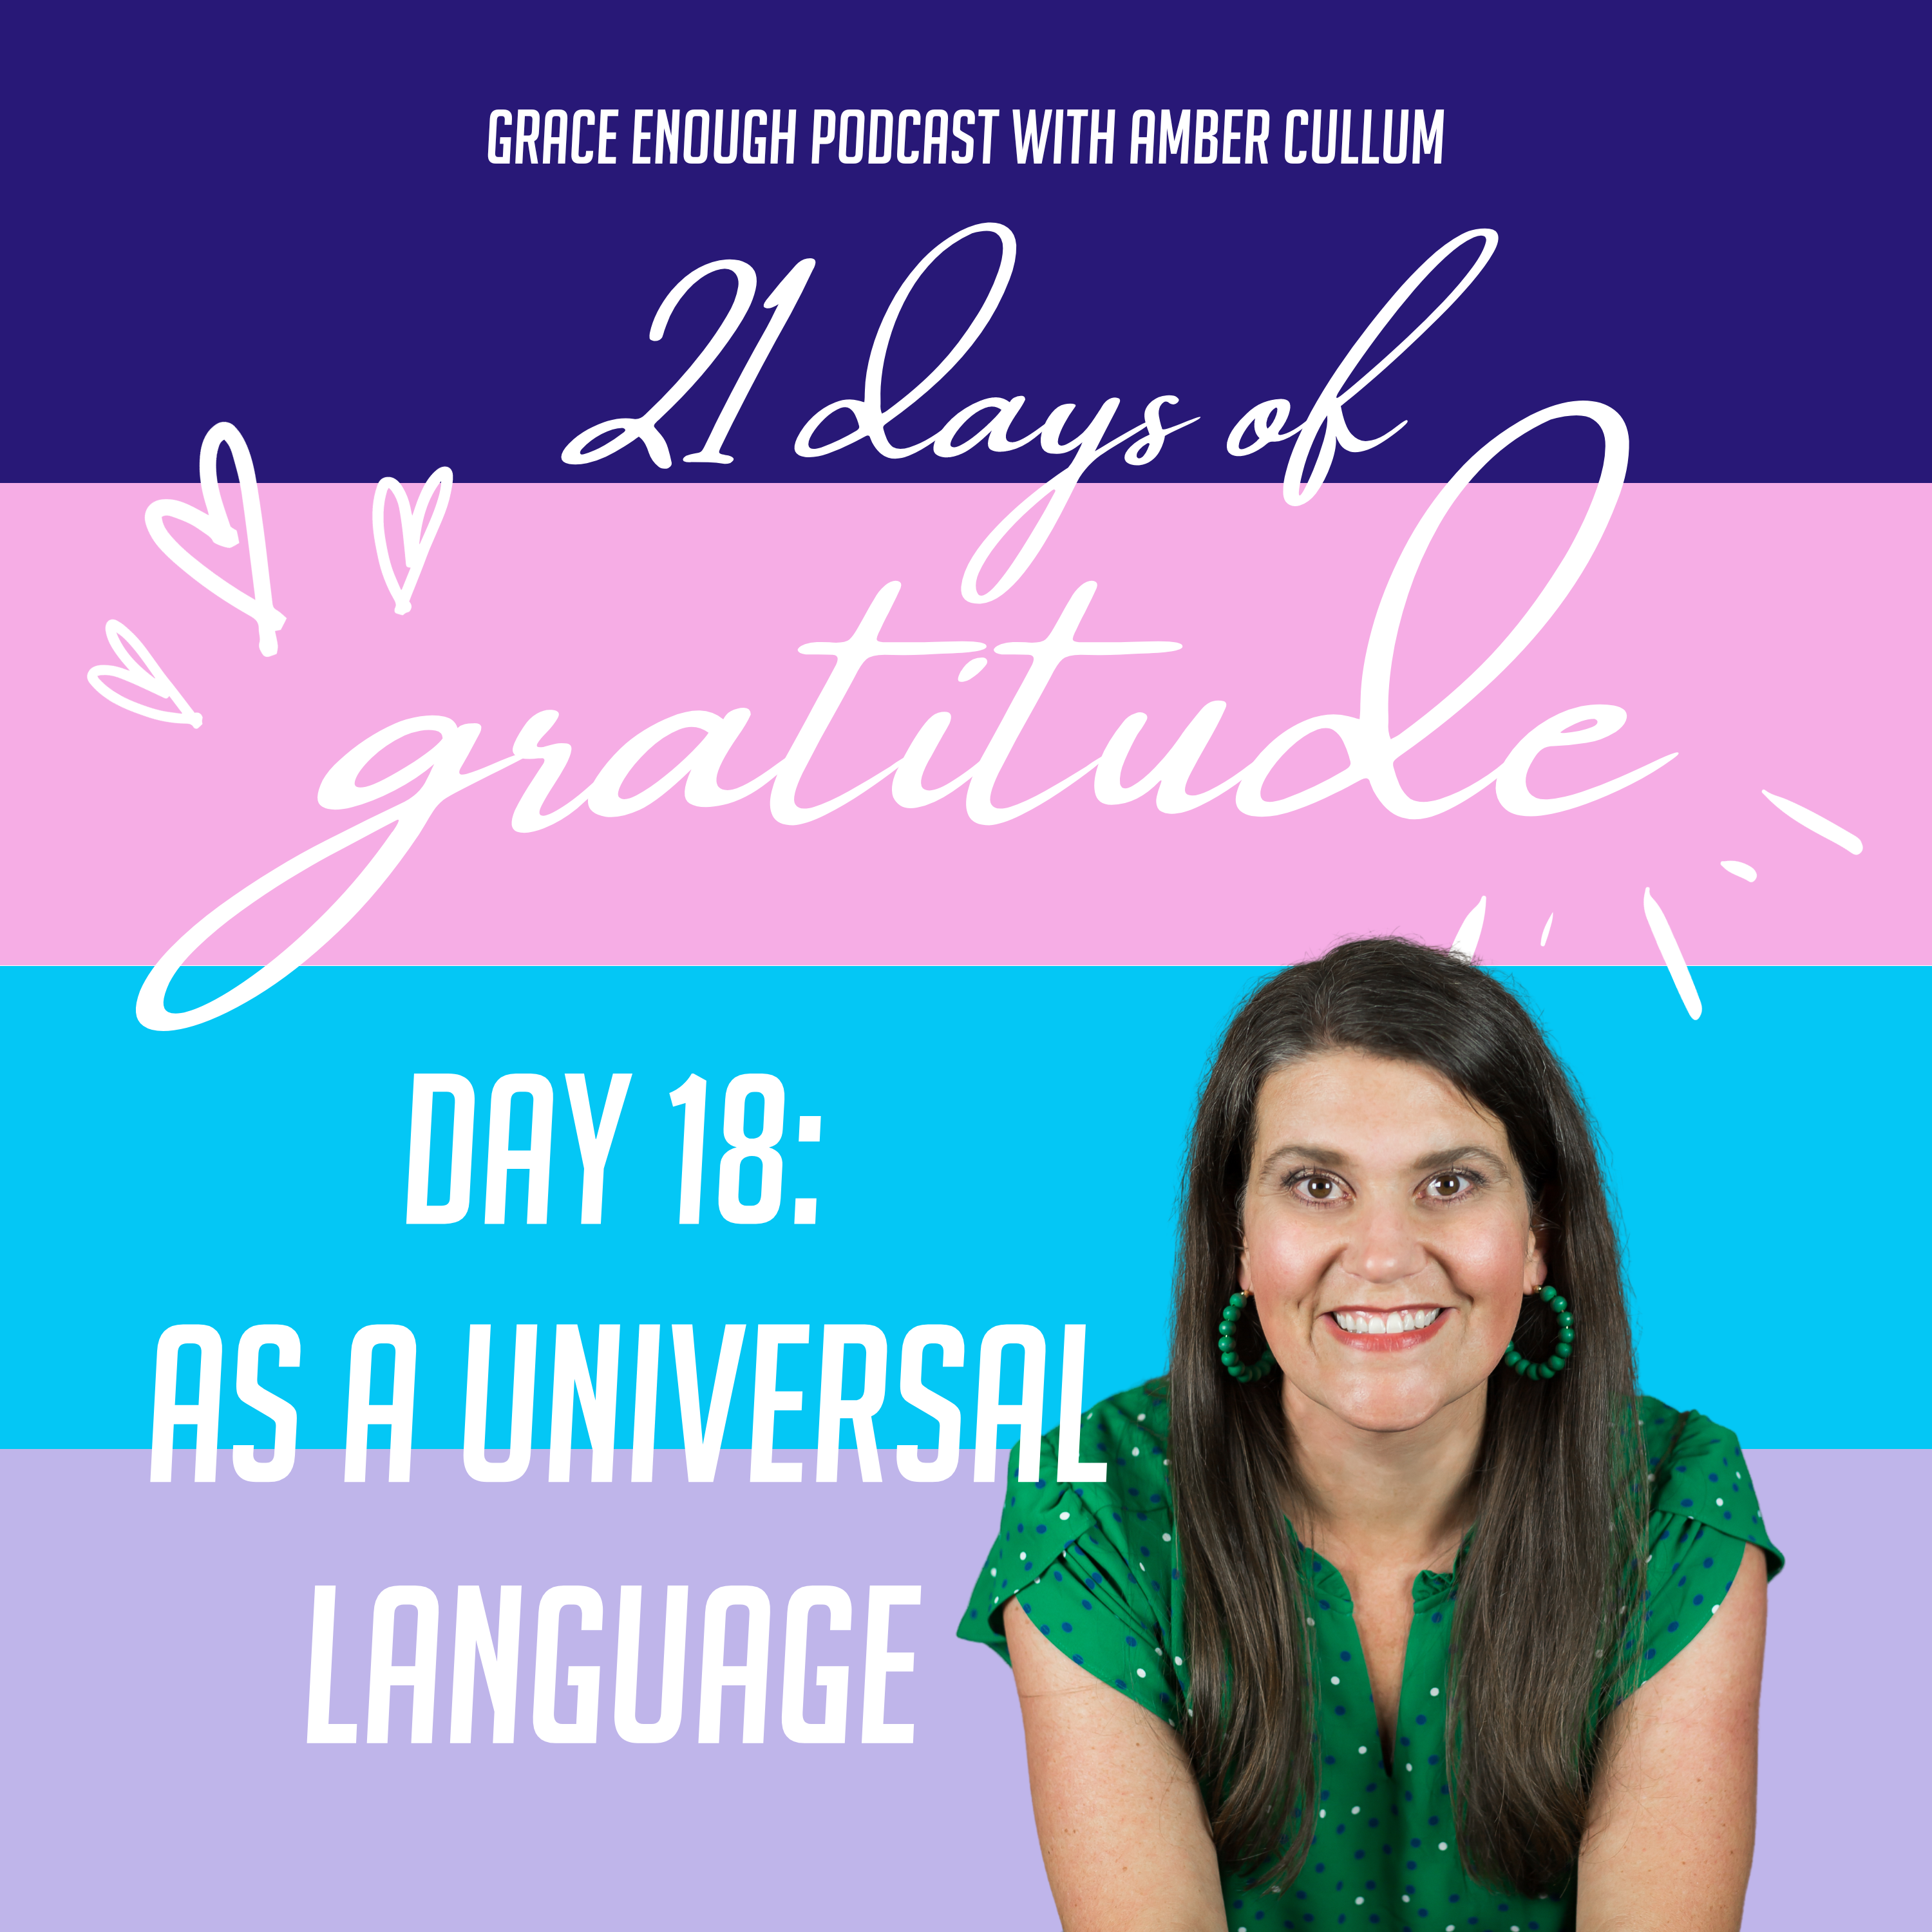 21 Days of Gratitude: Day 18, As a Universal Language